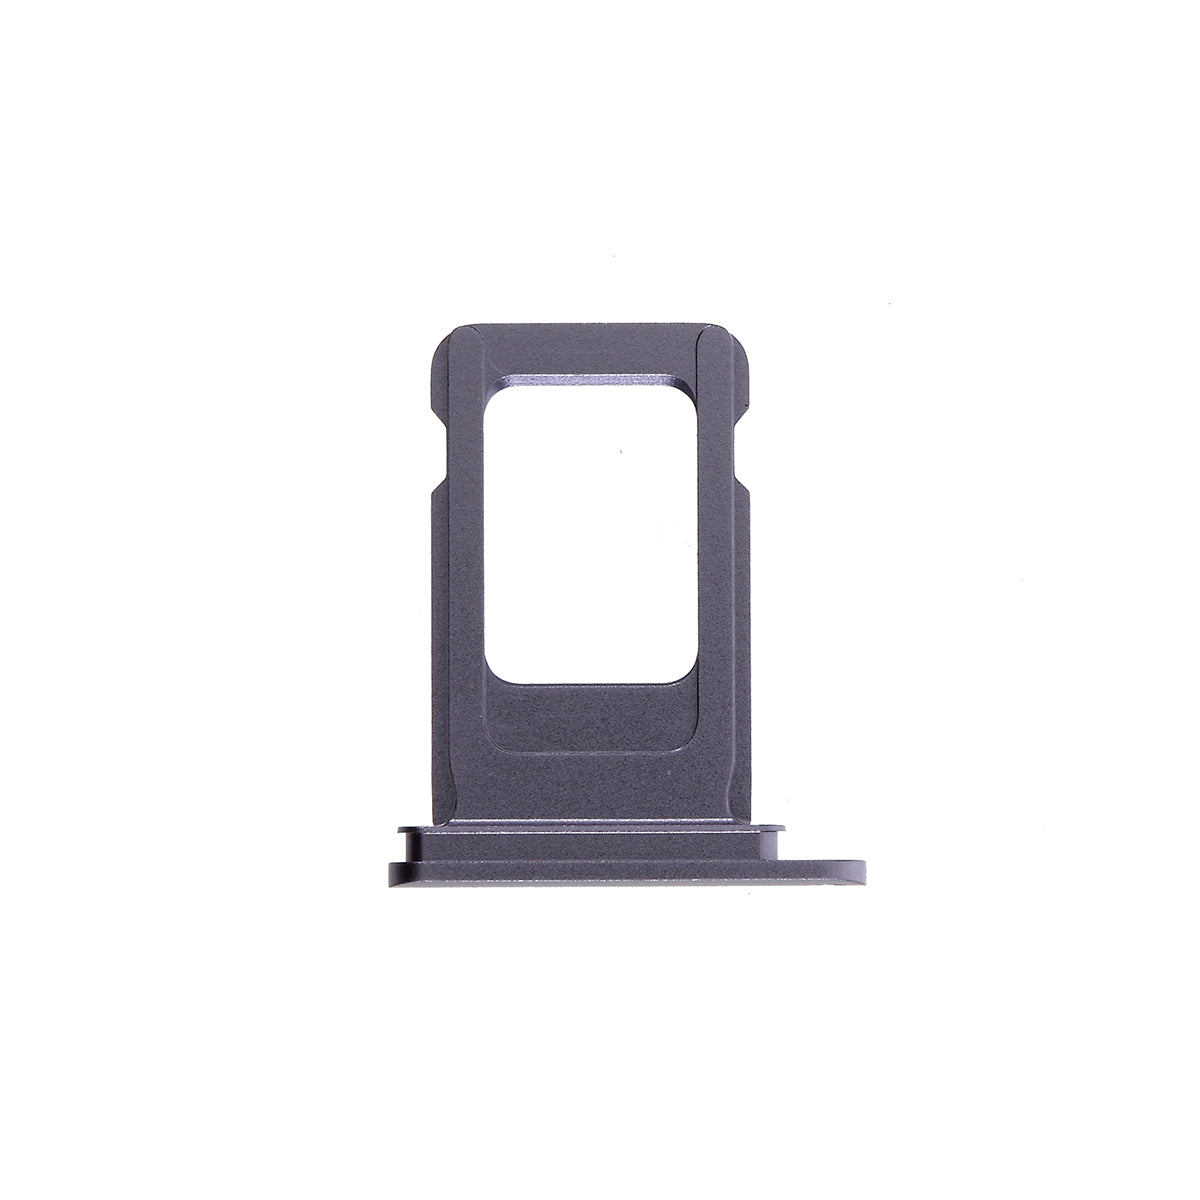 OEM SIM Card Tray Holder Replace Part for Apple iPhone 11 6.1 inch - Purple